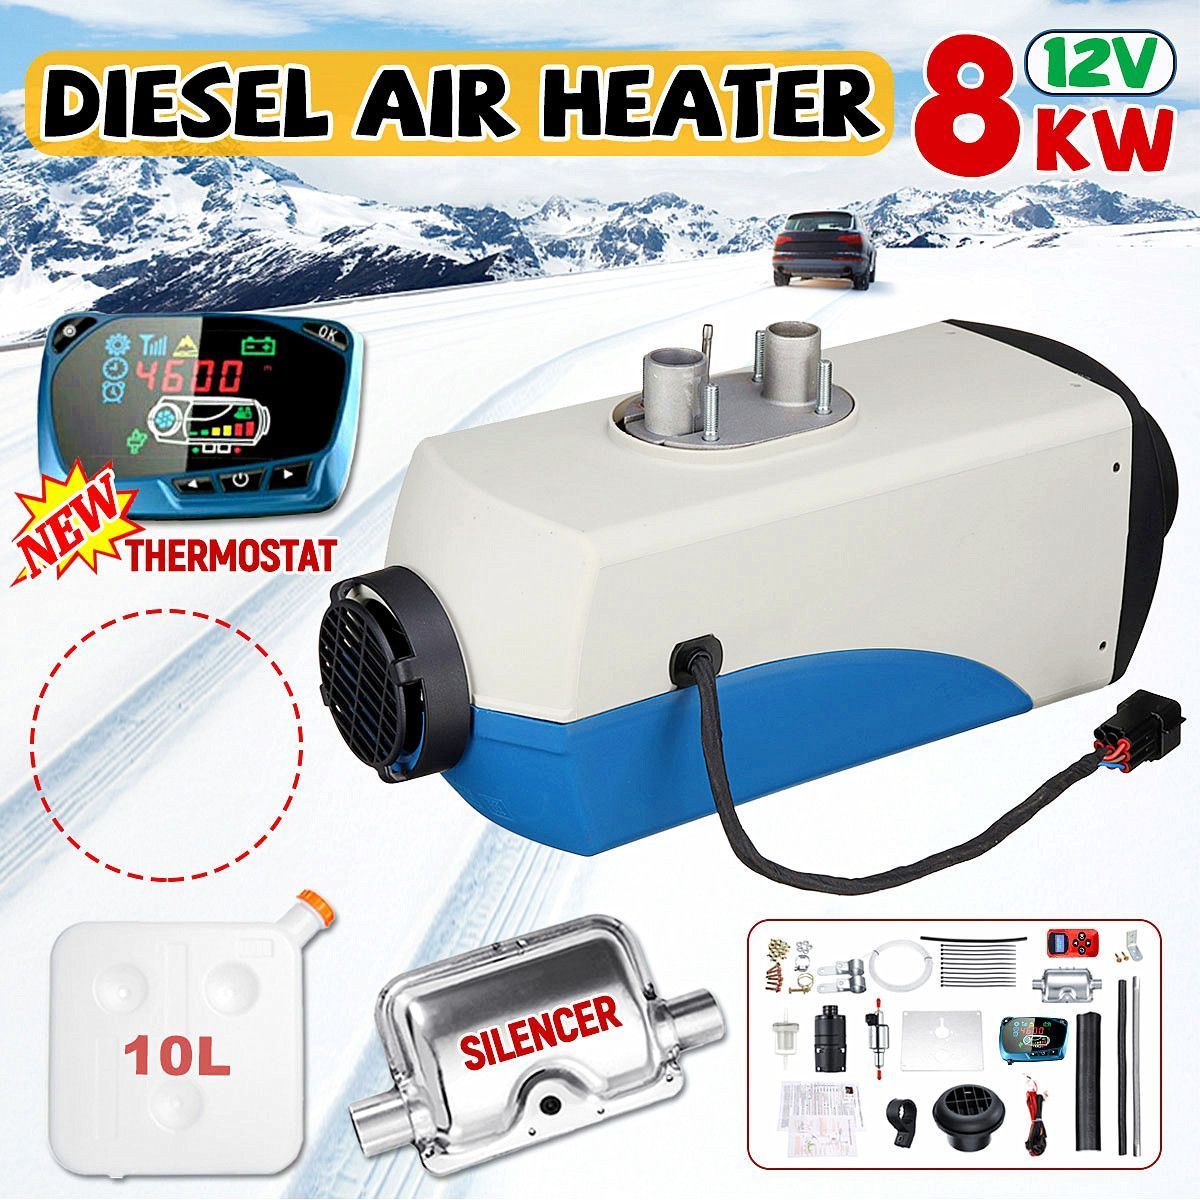 12V-8KW-Gray-Bottom-Blue-Cover-Blue-LCD-Version-Car-Heater-With-Remote-Control-1415022